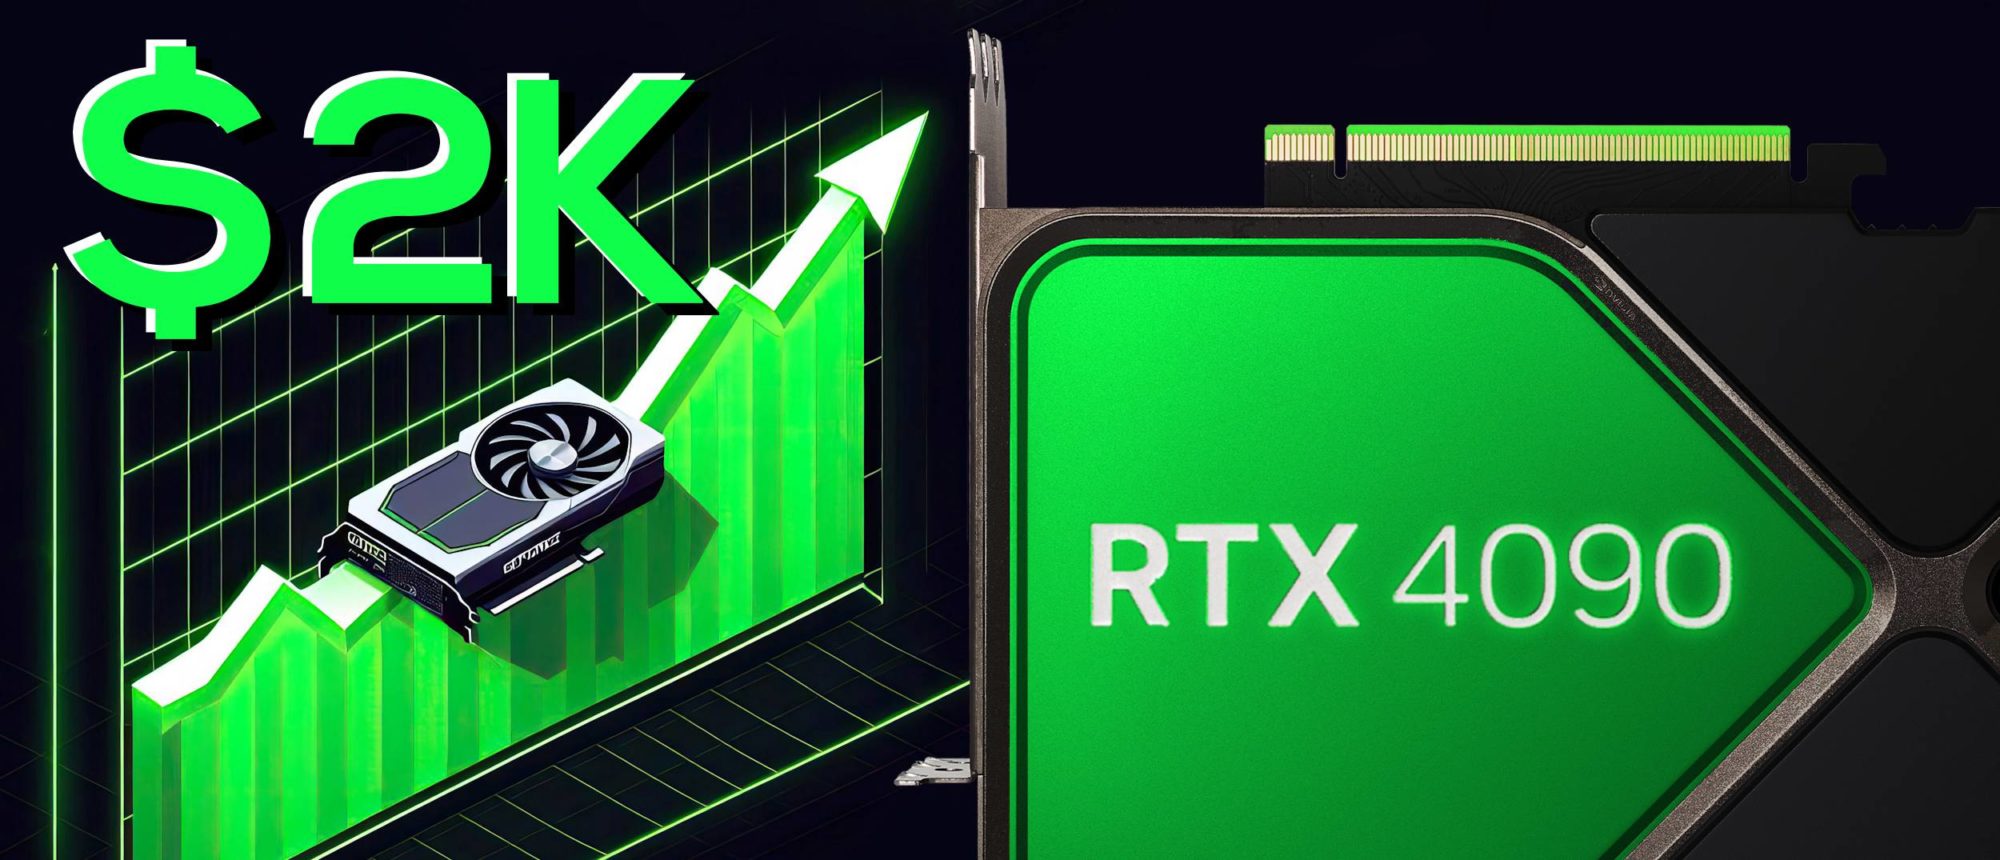 Want an RTX 4080? Prices suggest you may as well get a 4090